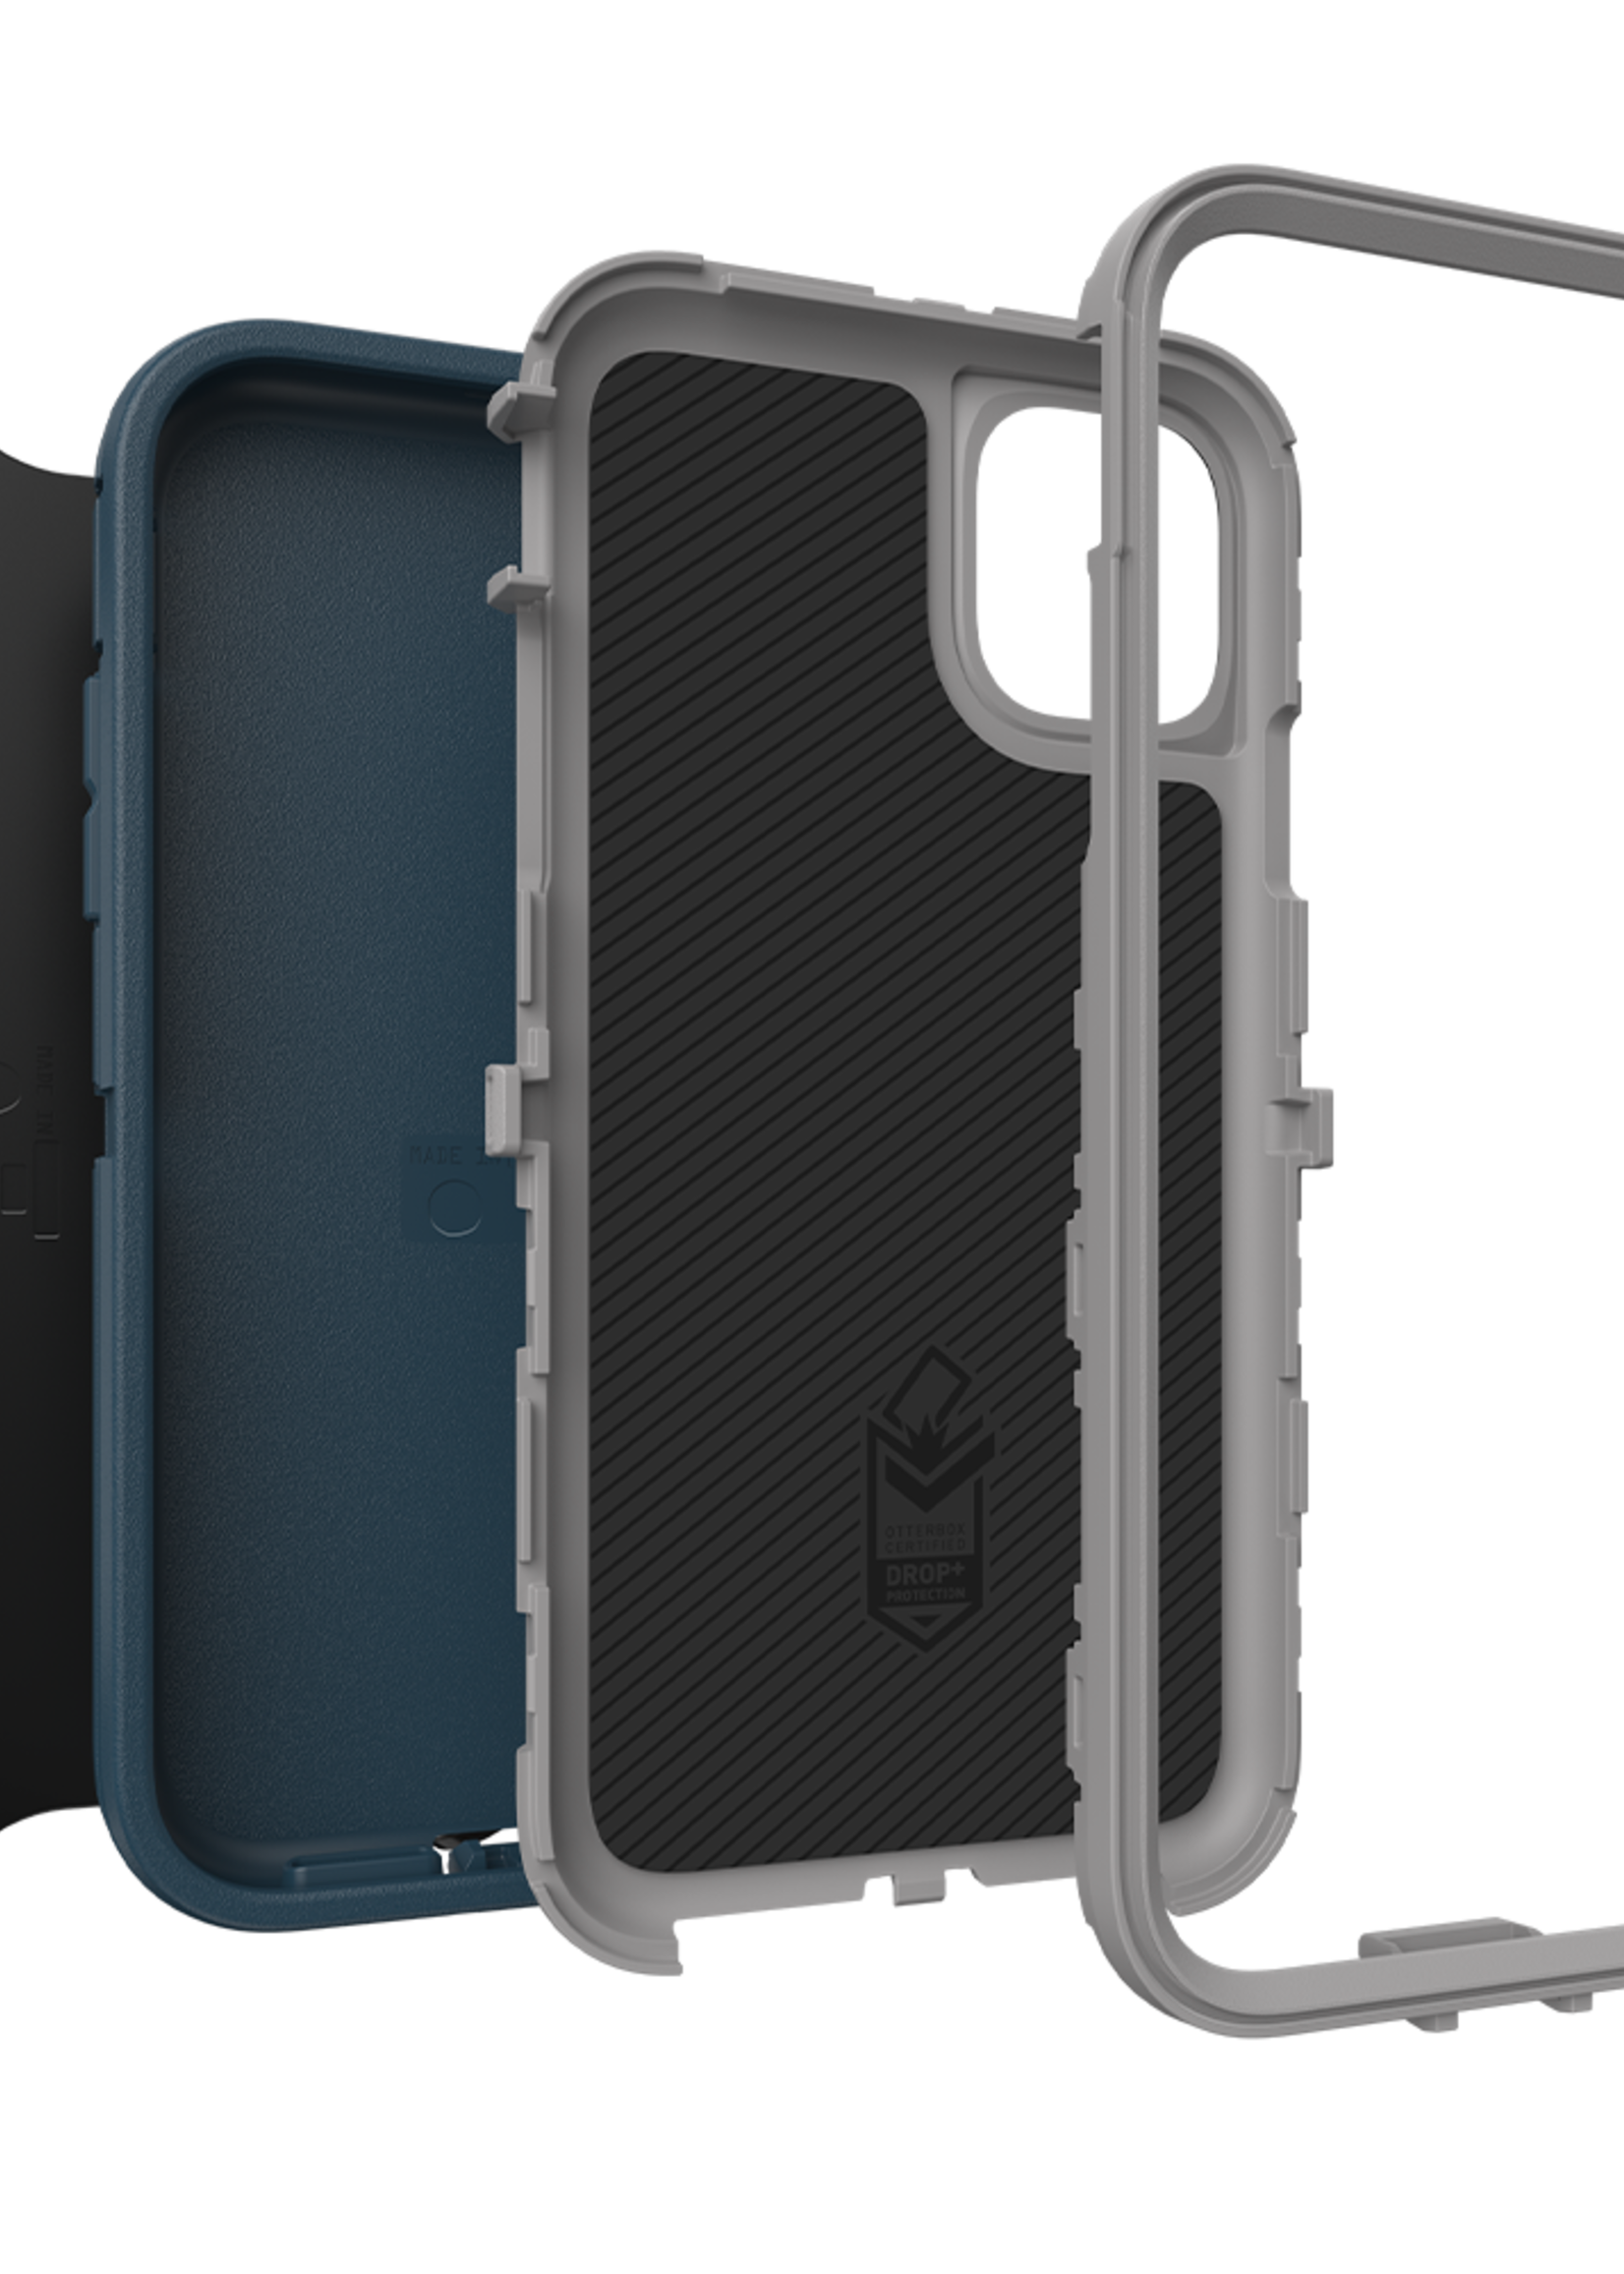 Otterbox OtterBox - Defender Case for Apple iPhone 11 - Gone Fishin